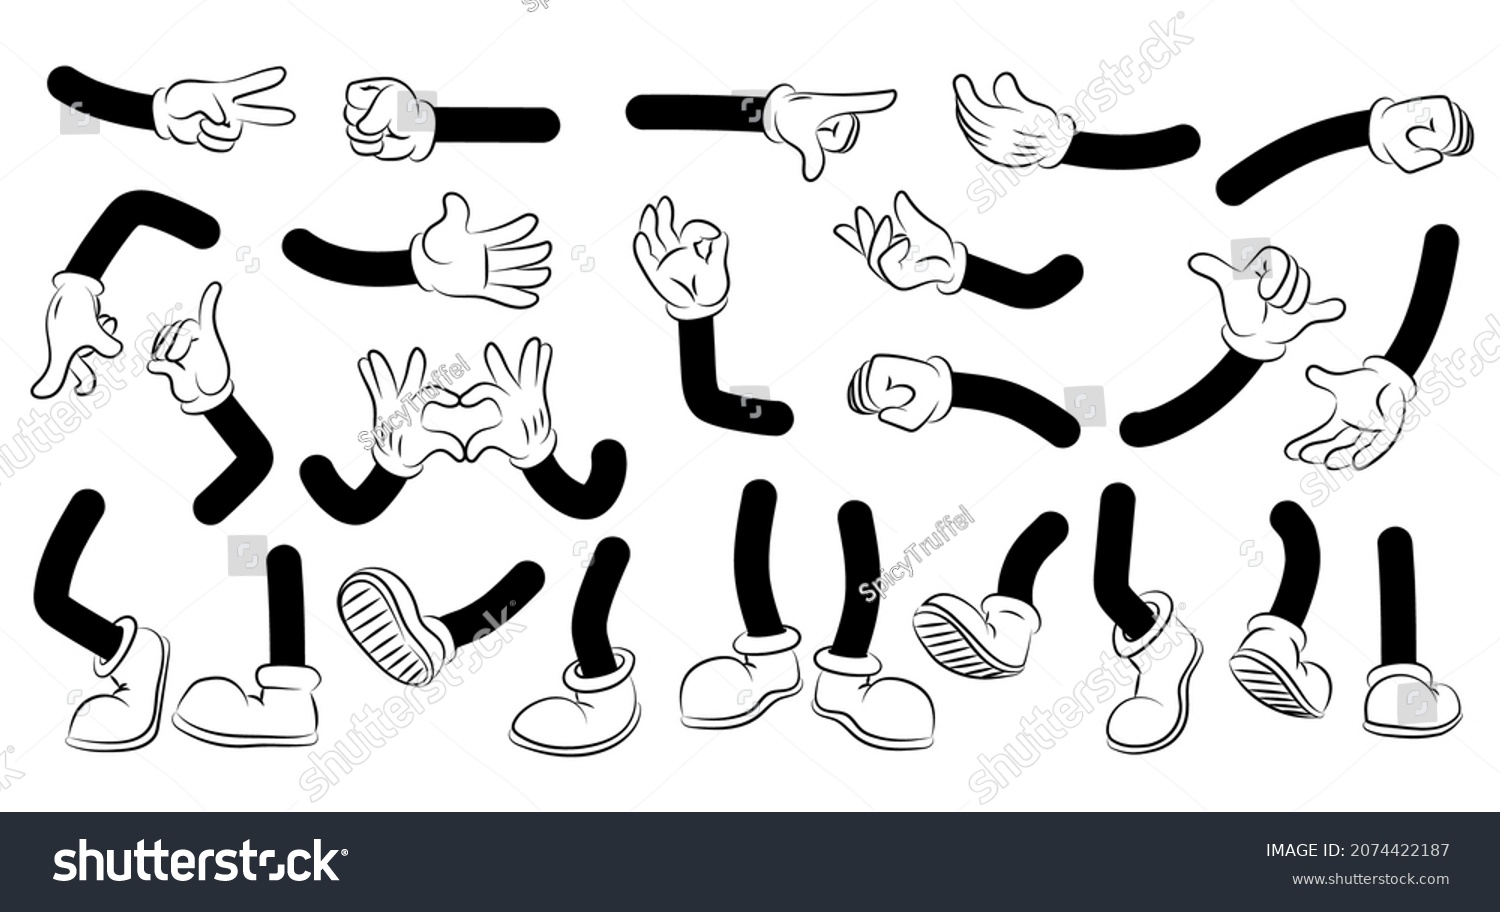 Cartoon arms and legs. Doodle human body parts. Character hands and foots in white gloves and boots. Limbs clipart expressions or gestures collection. Vector wrist and sole pairs set #2074422187